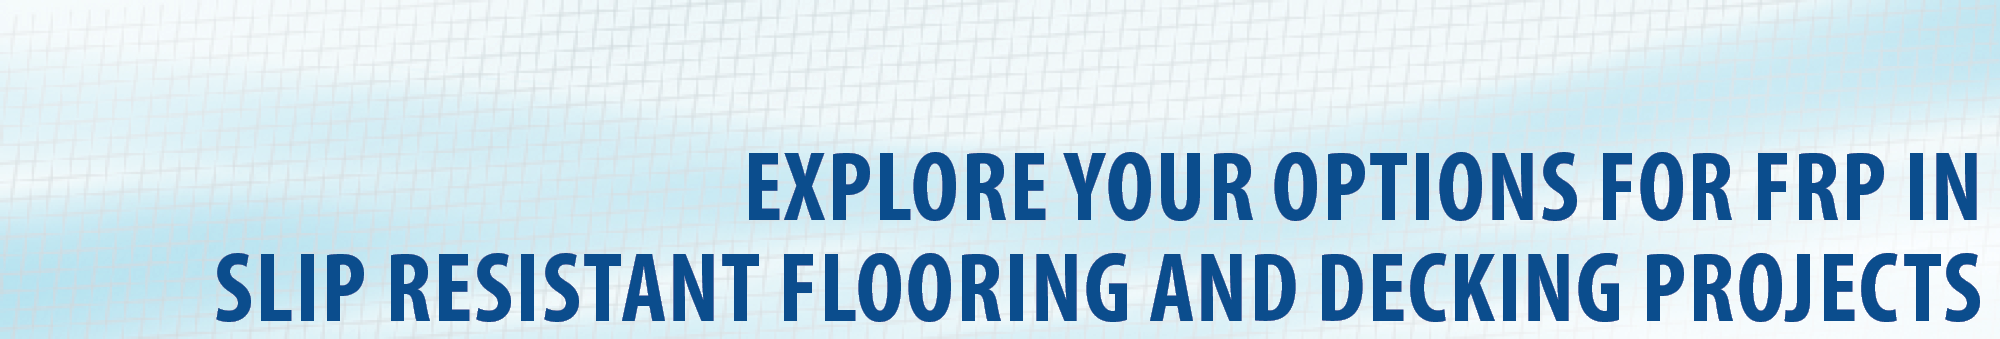 Explore Your Options for FRP in Slip Resistant Flooring and Decking Projects